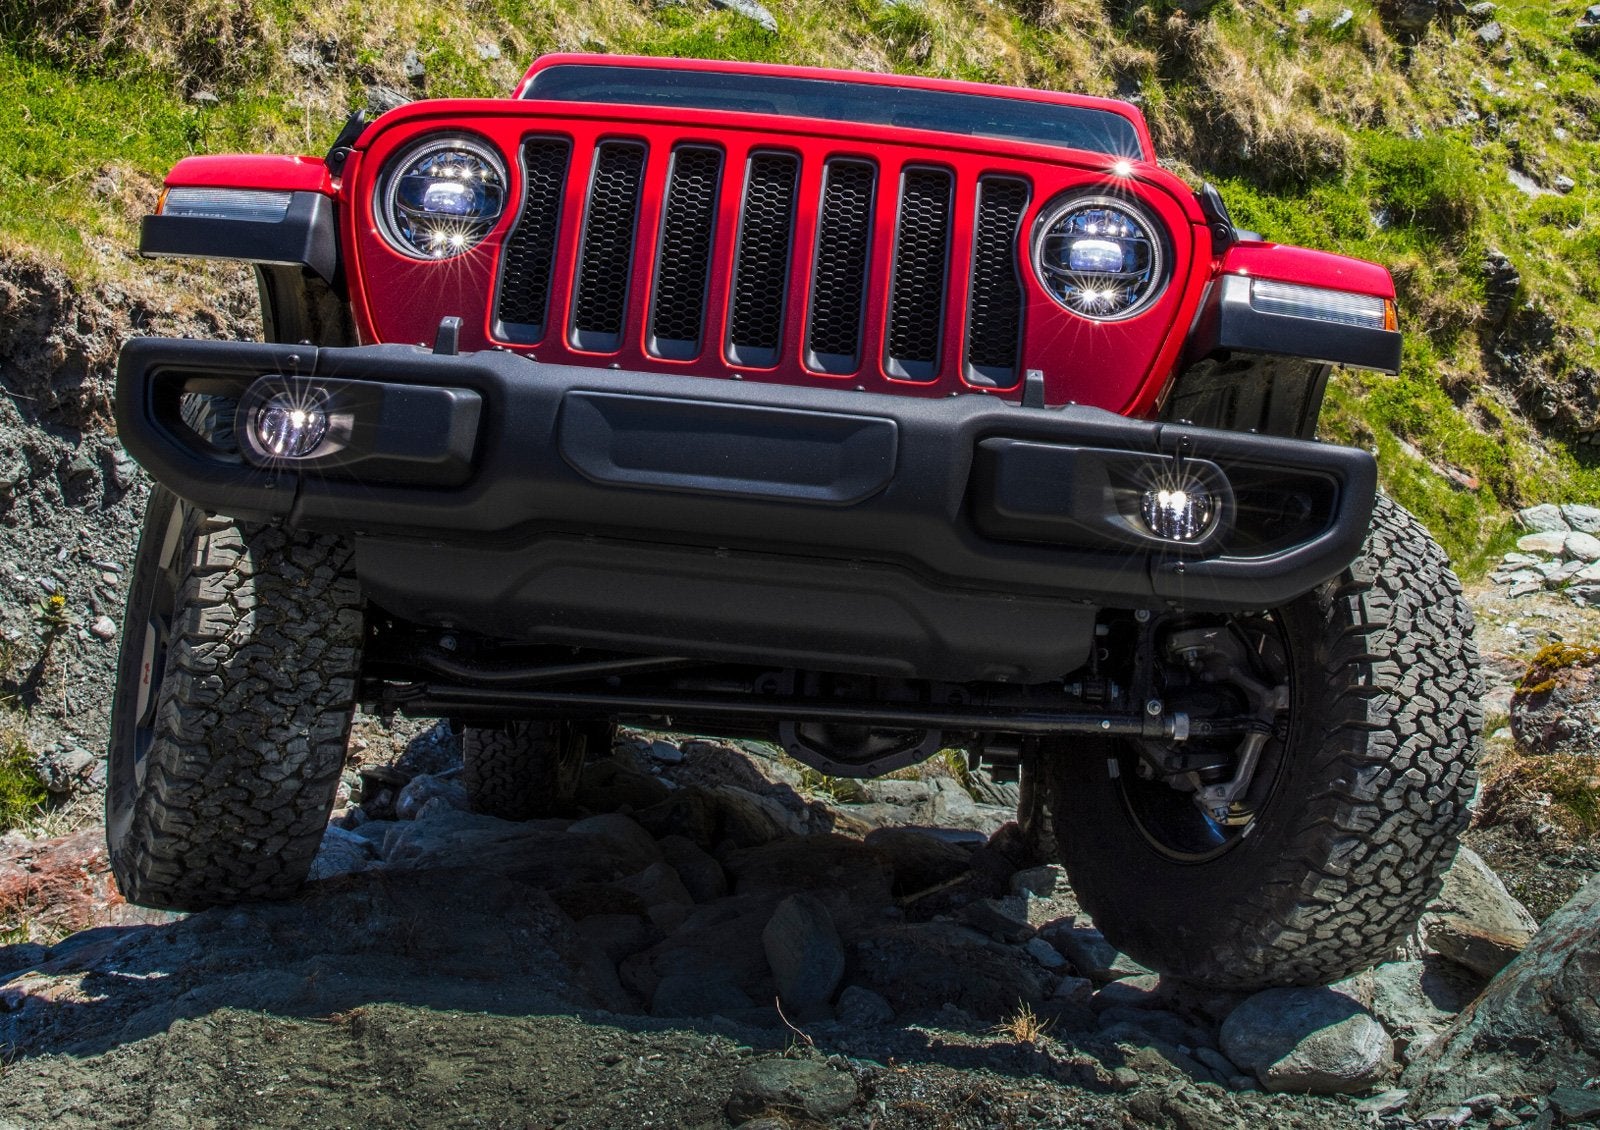 What are the Best Jacks for Jeep Owners? | Jeep Wrangler Forum